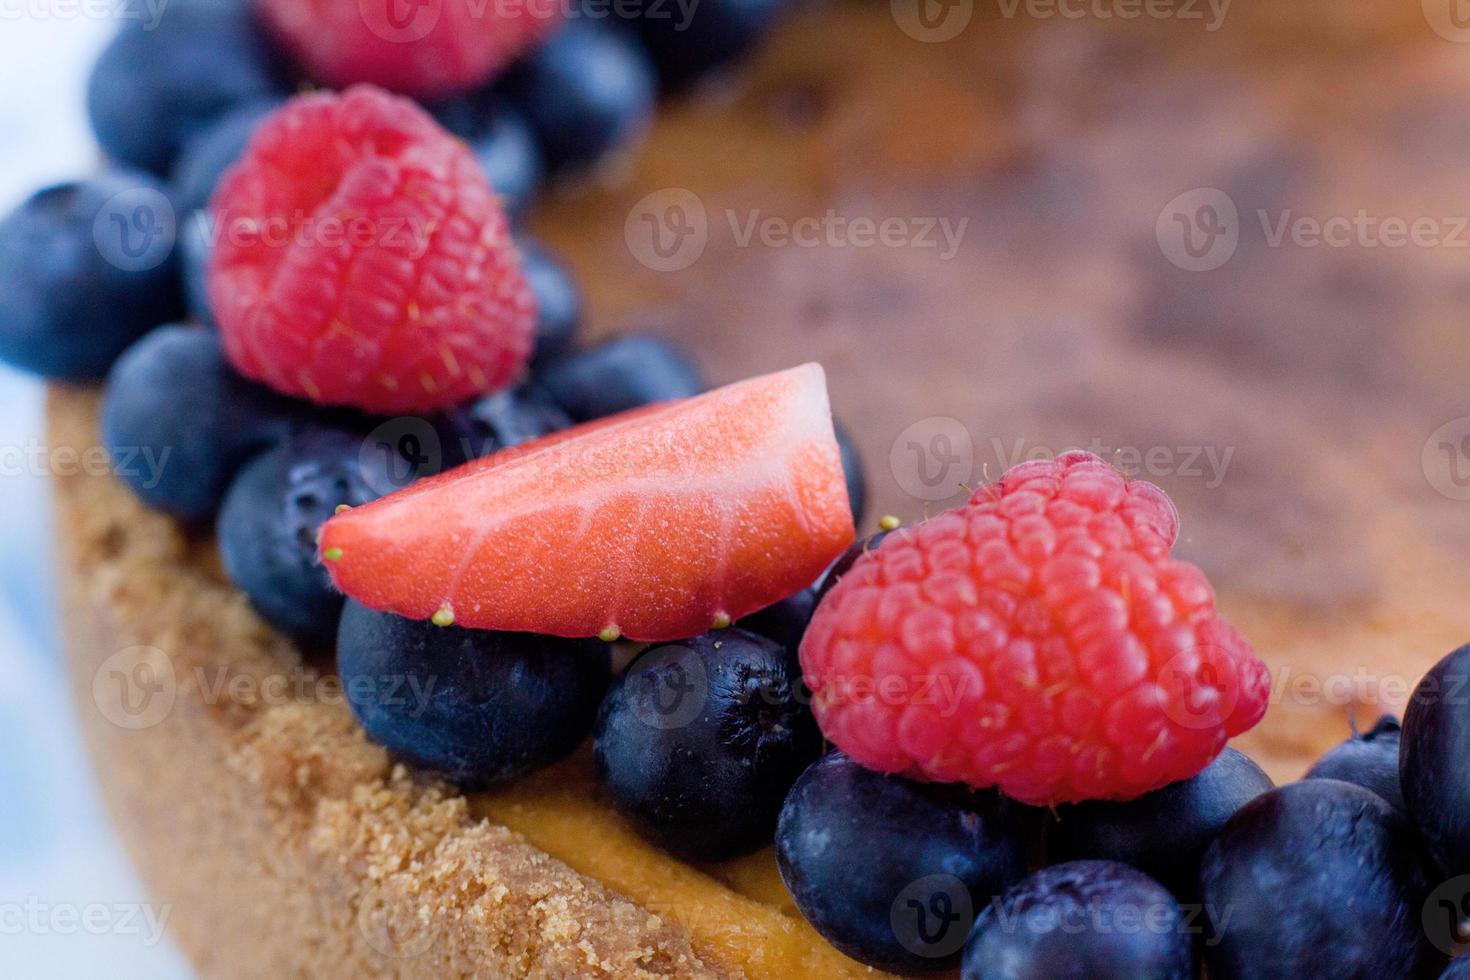 Strawberries, raspberries, blueberries on a pie close-up. Decorating a cake with berries. Berry close-up photo